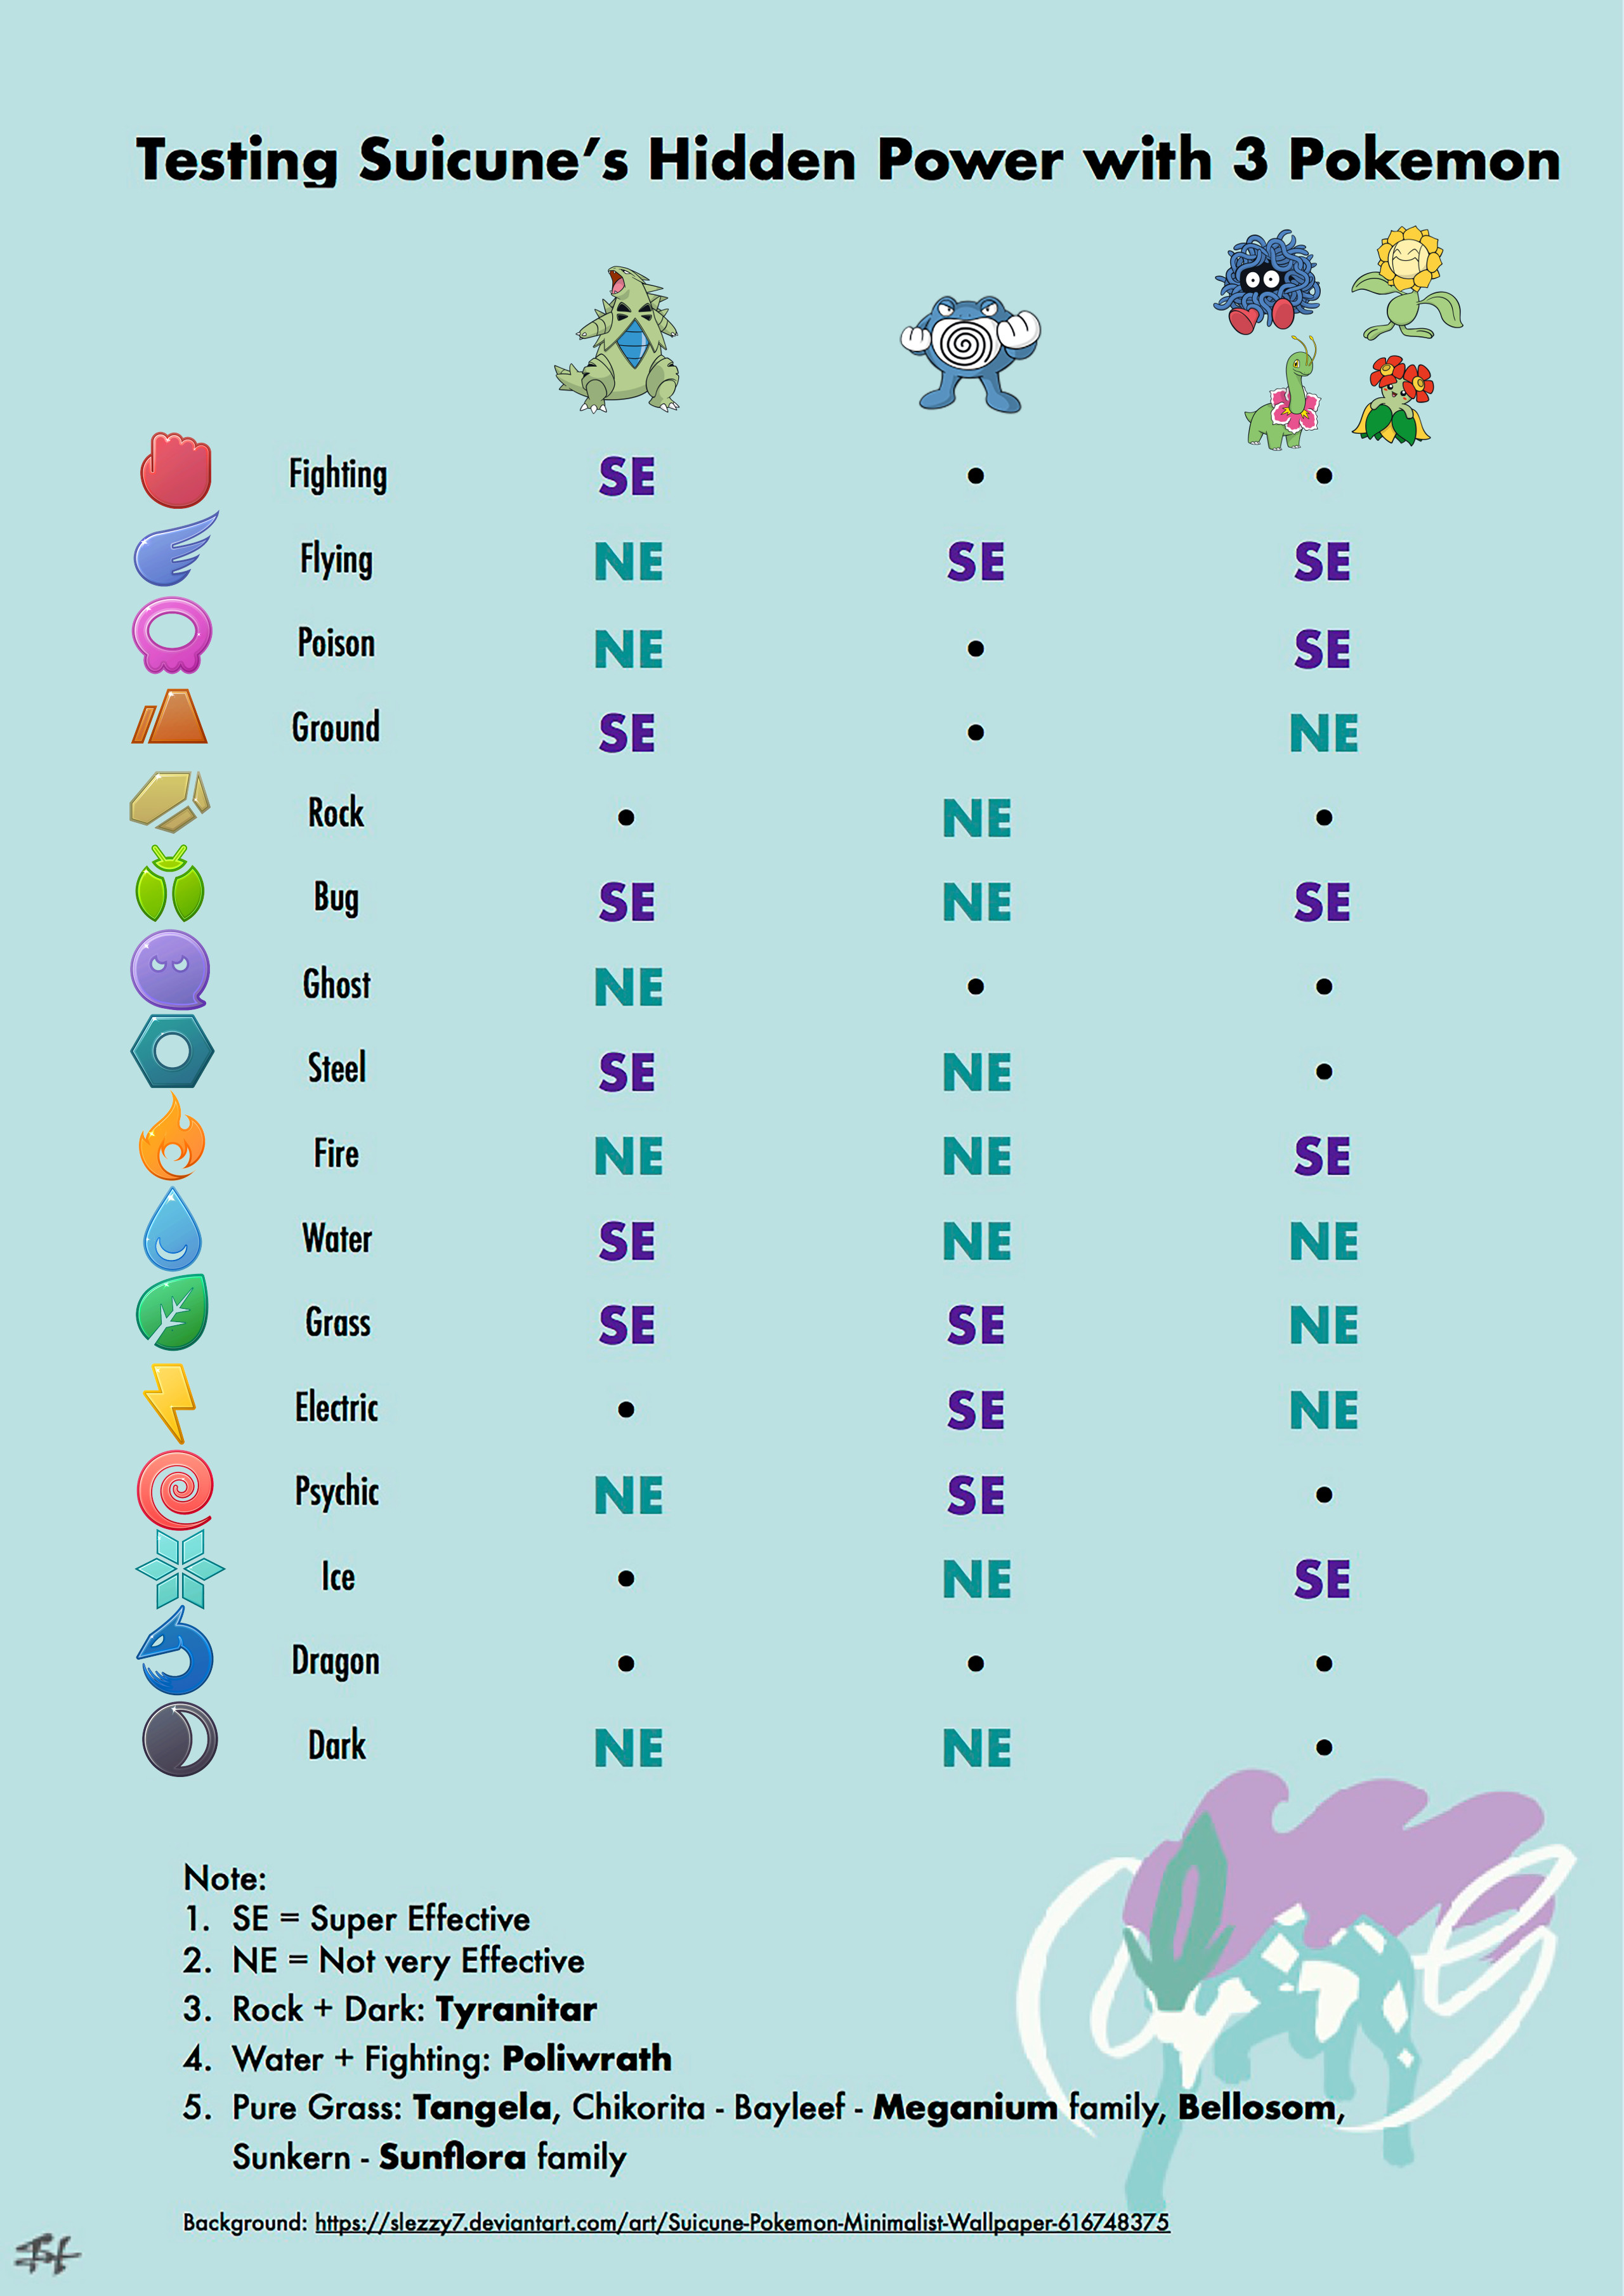 Legendary Beasts Detailed Counters Infographic. Entei, Suicune and Raikou.